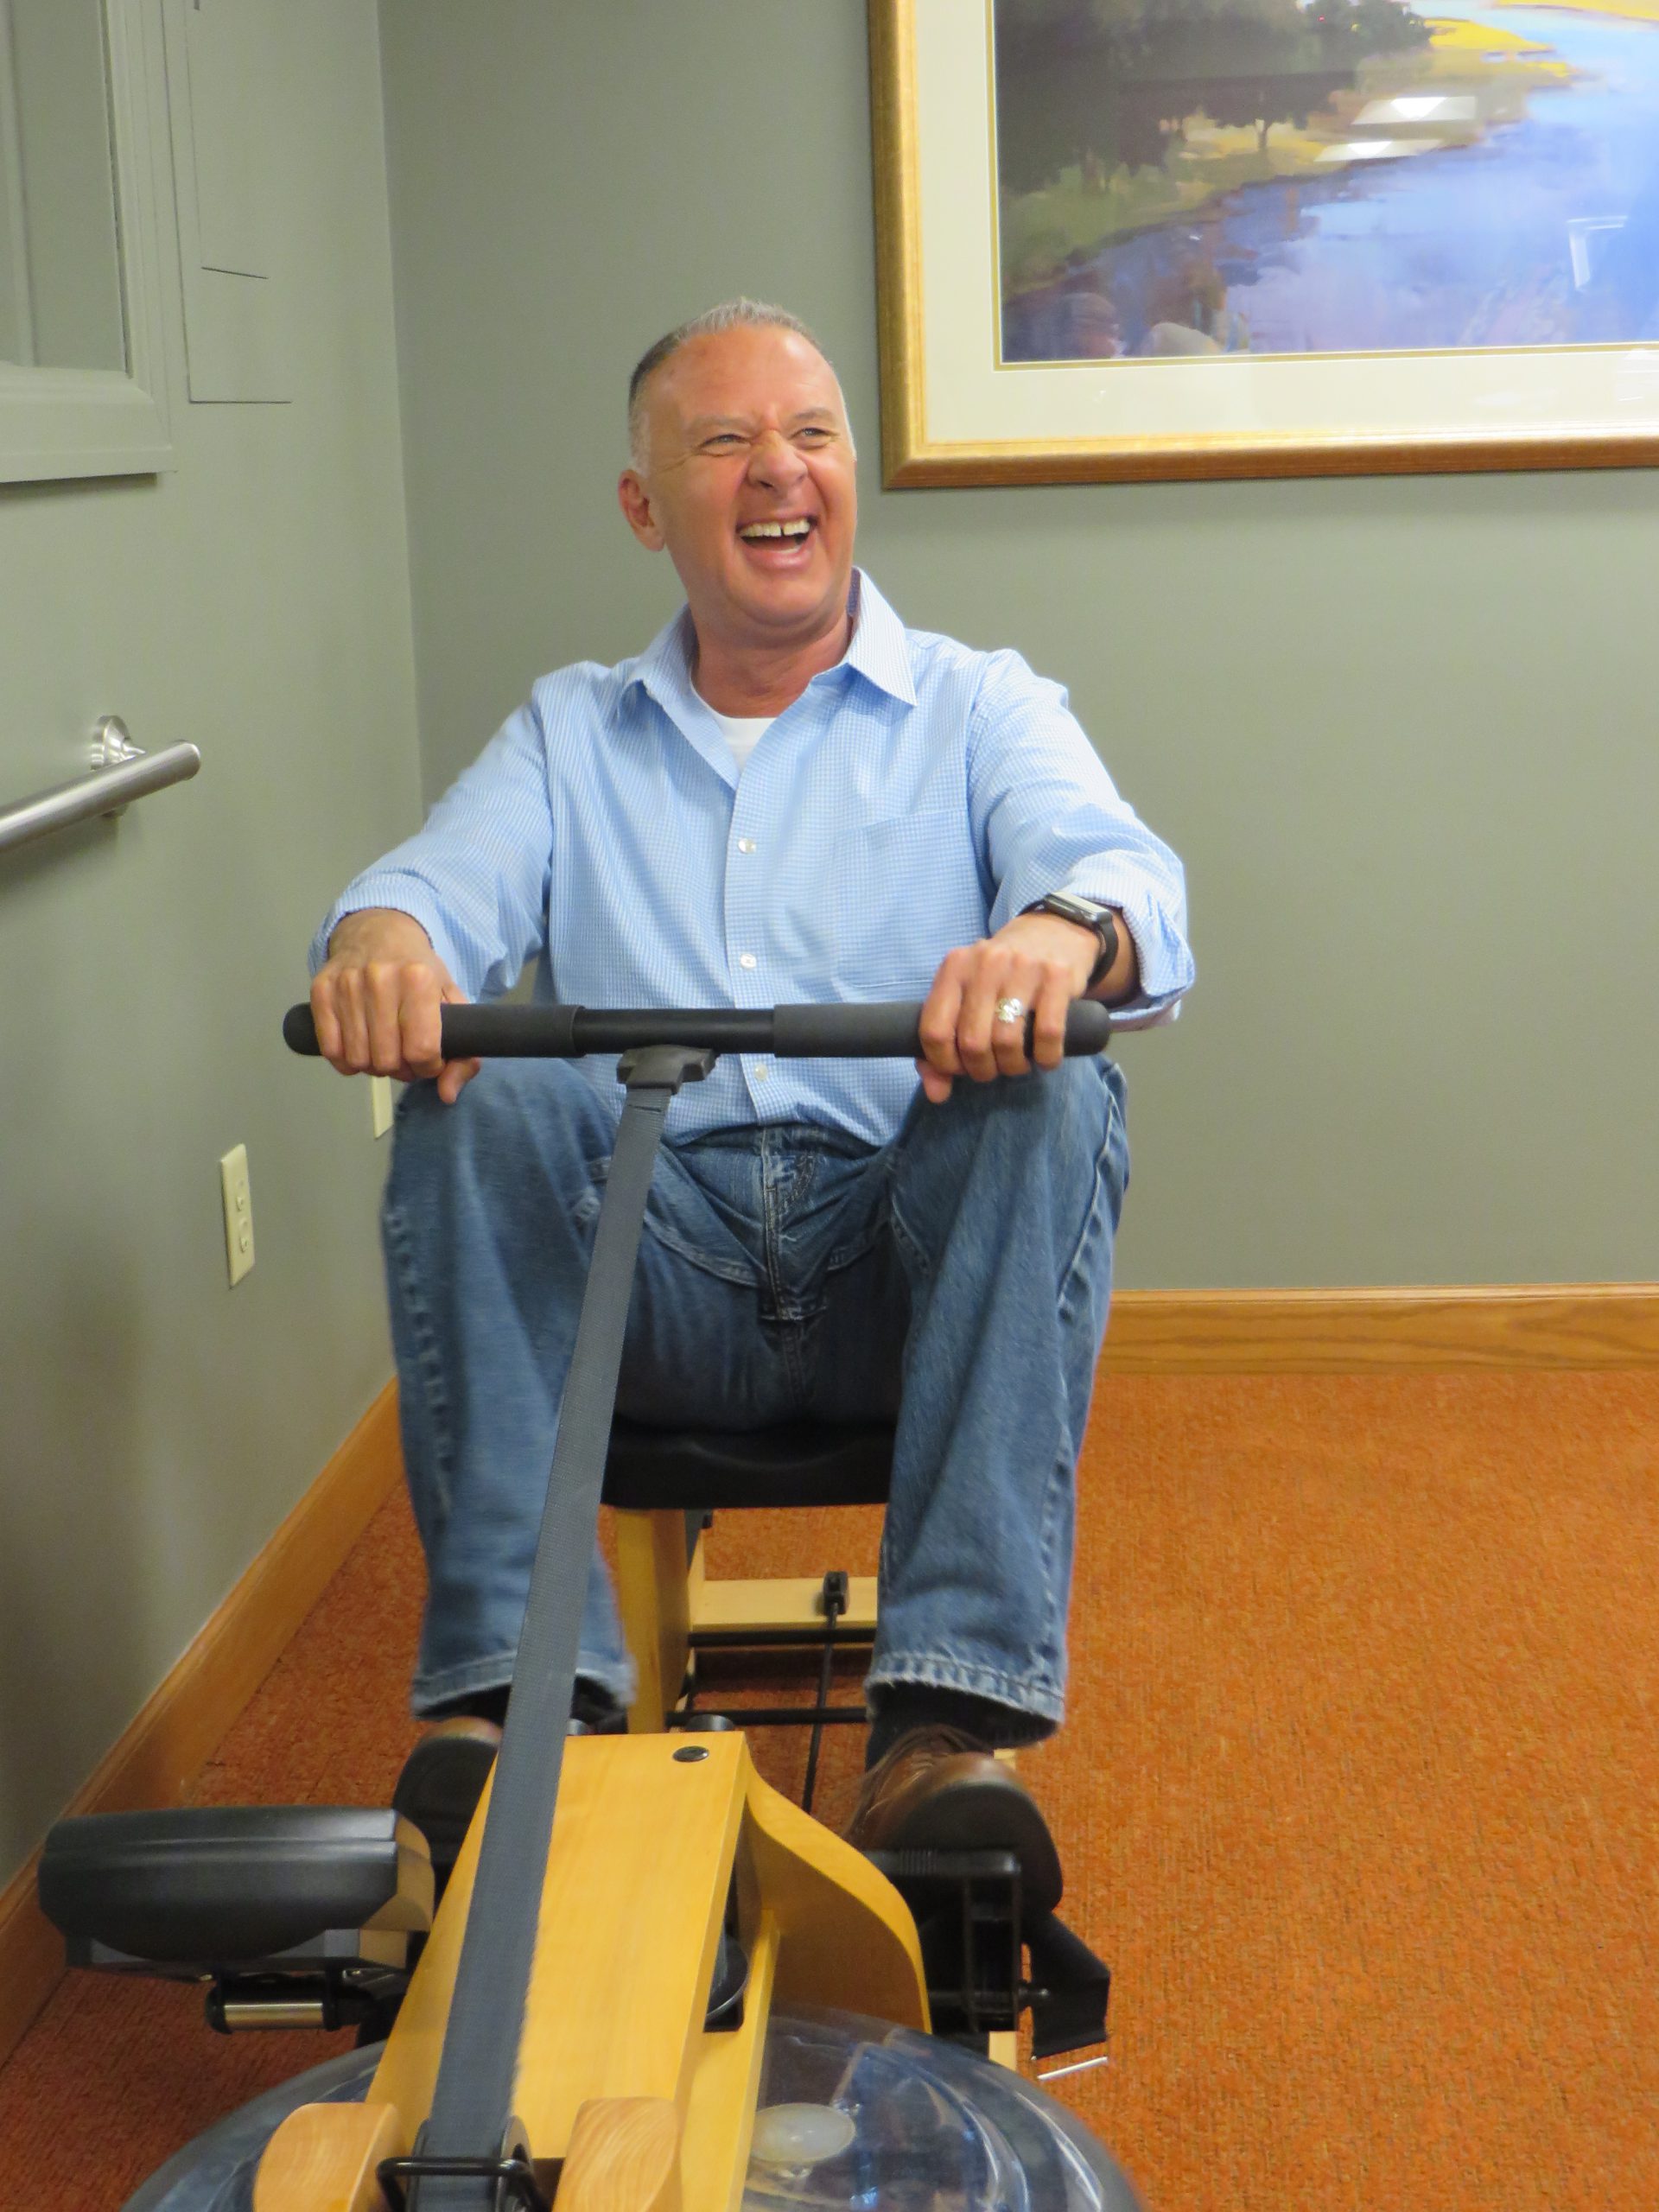 John tries out some equipment in our fitness room.